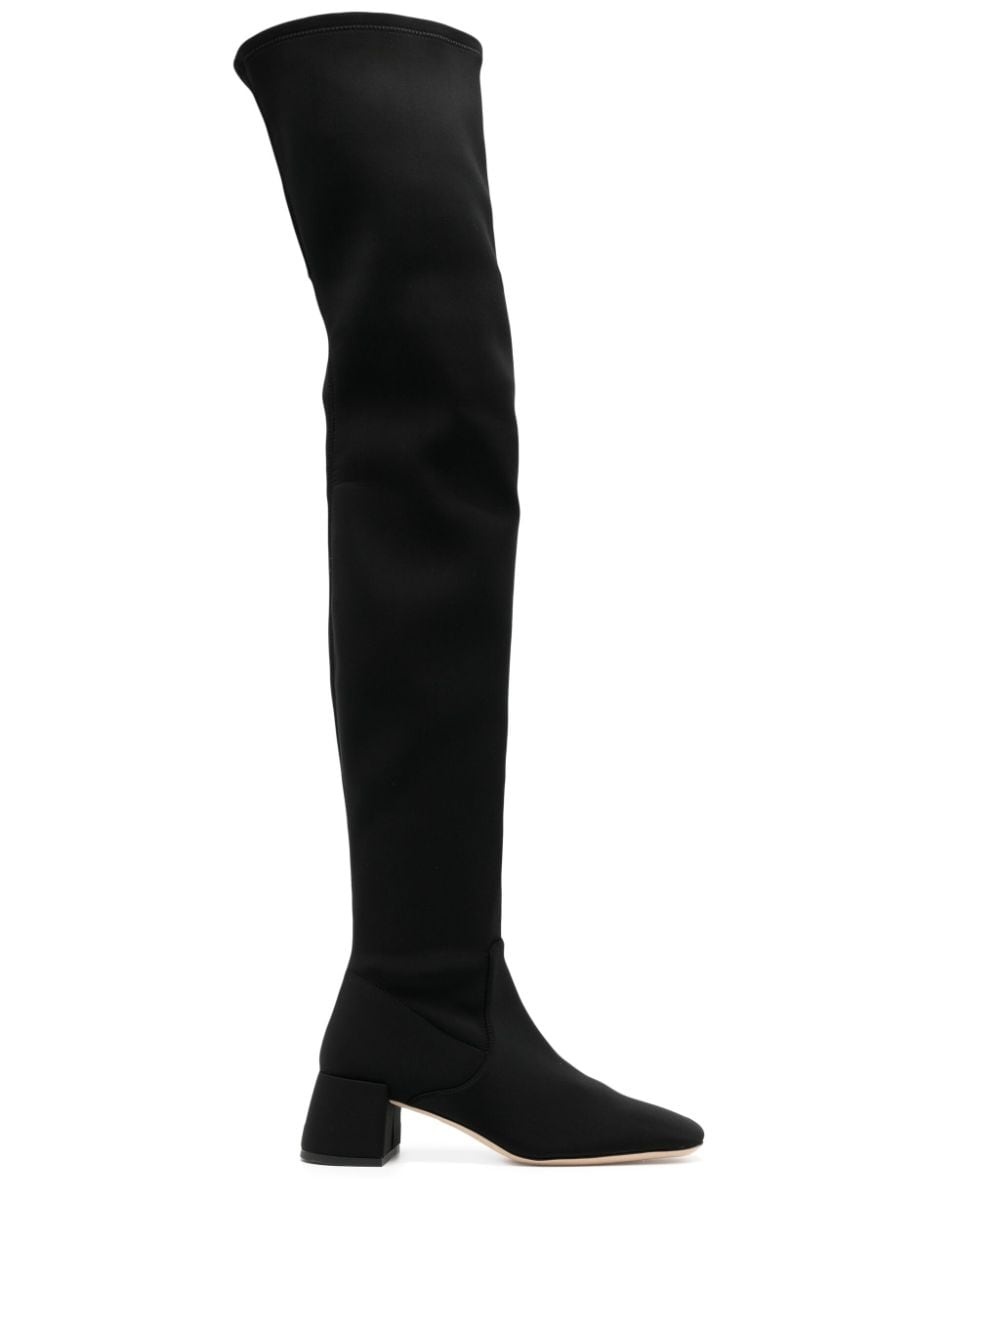 55mm over-the-knee boots - 1